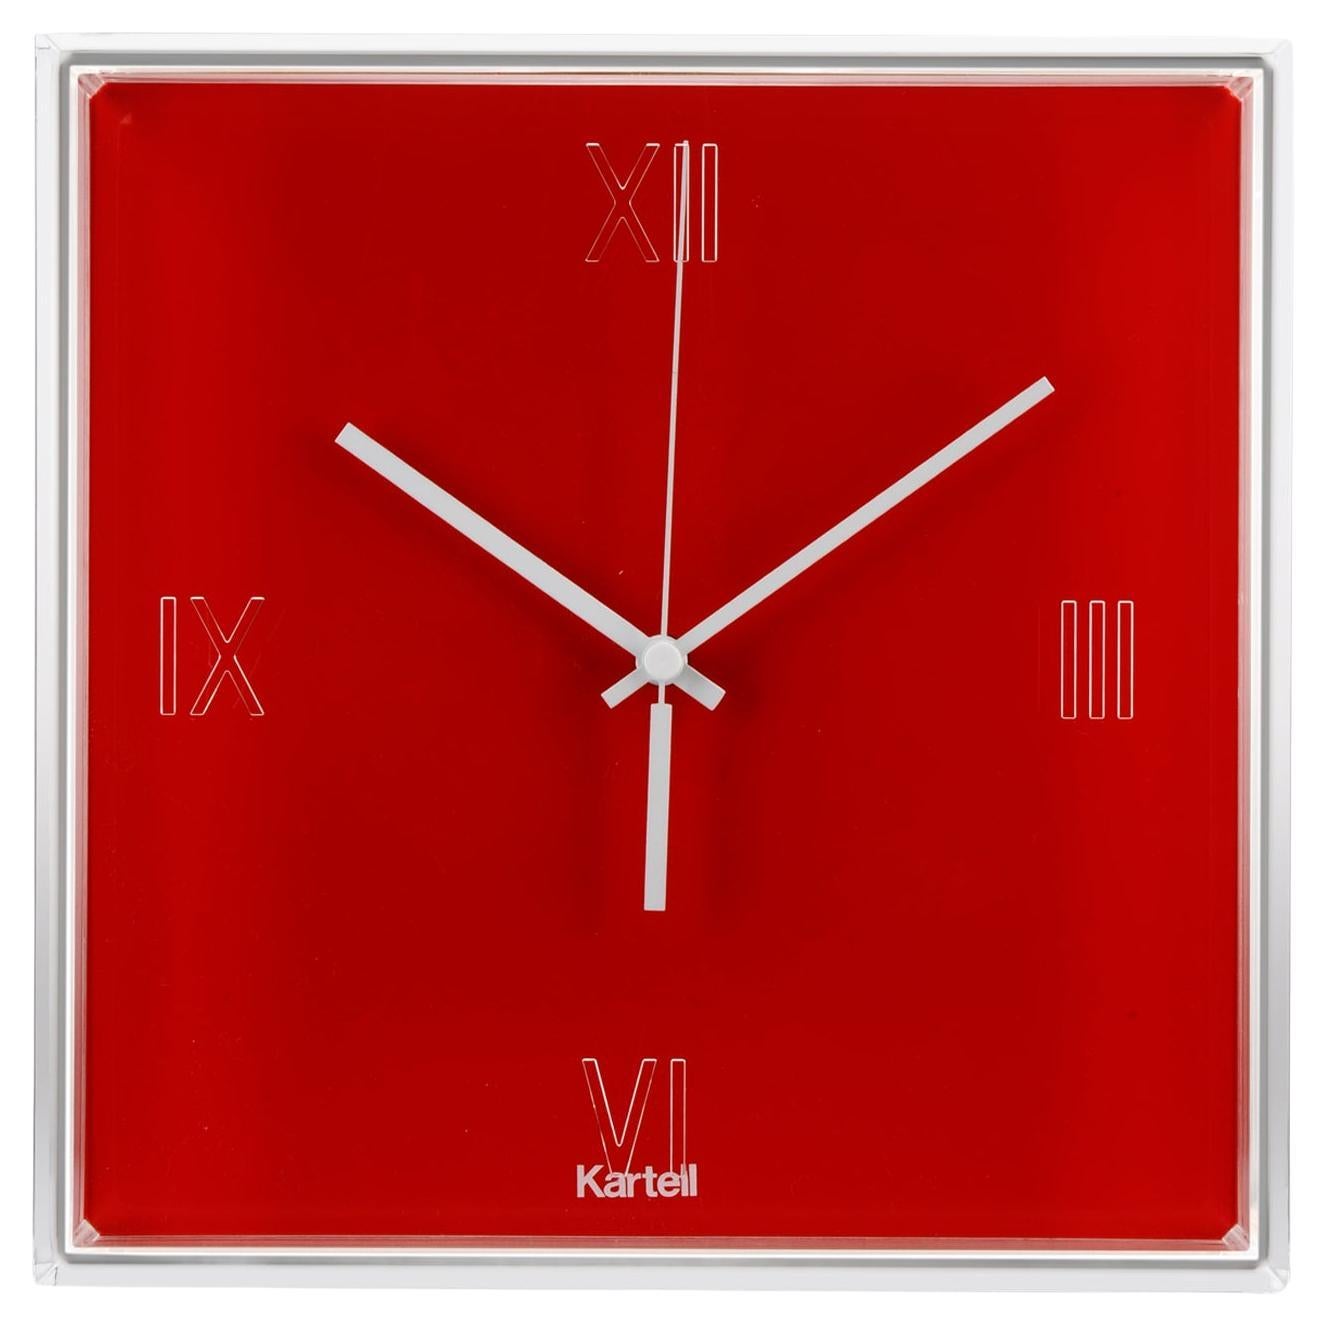 Kartell Tic & Tac Clock in Orange Red by Philippe Starck & Eugeni Quitllet